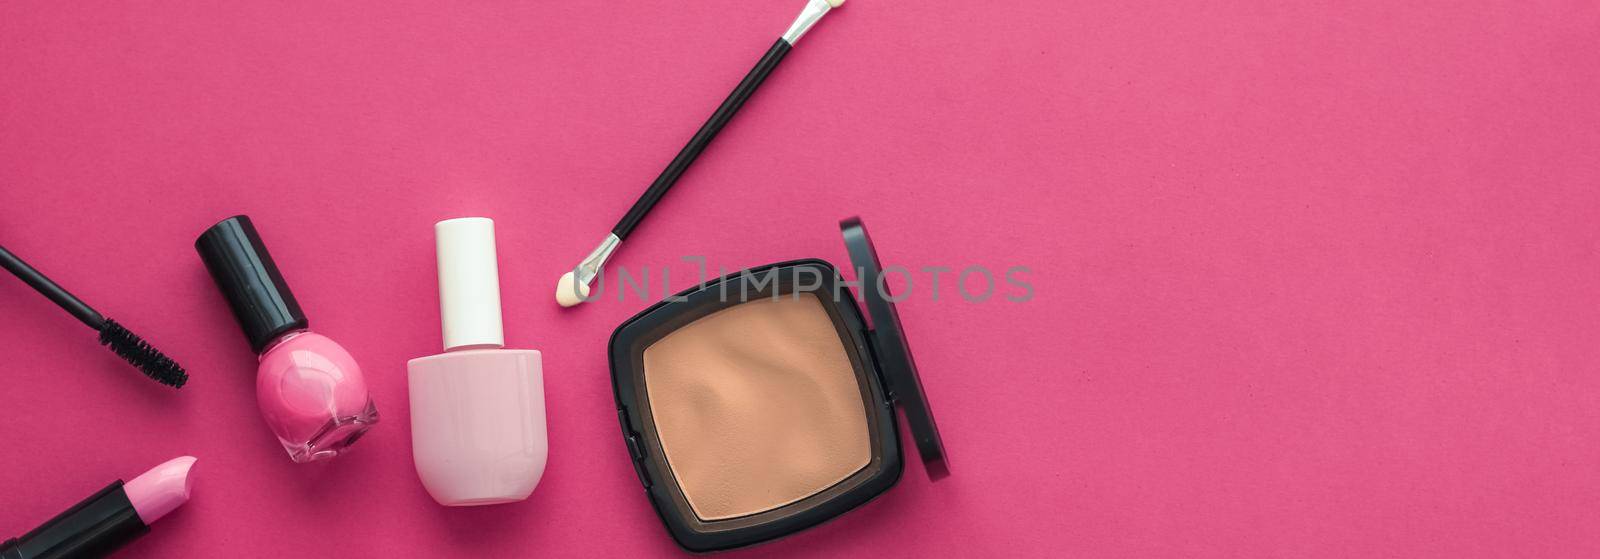 Make-up and cosmetics product set for beauty brand Christmas sale promotion, luxury pink flatlay background as holiday design by Anneleven